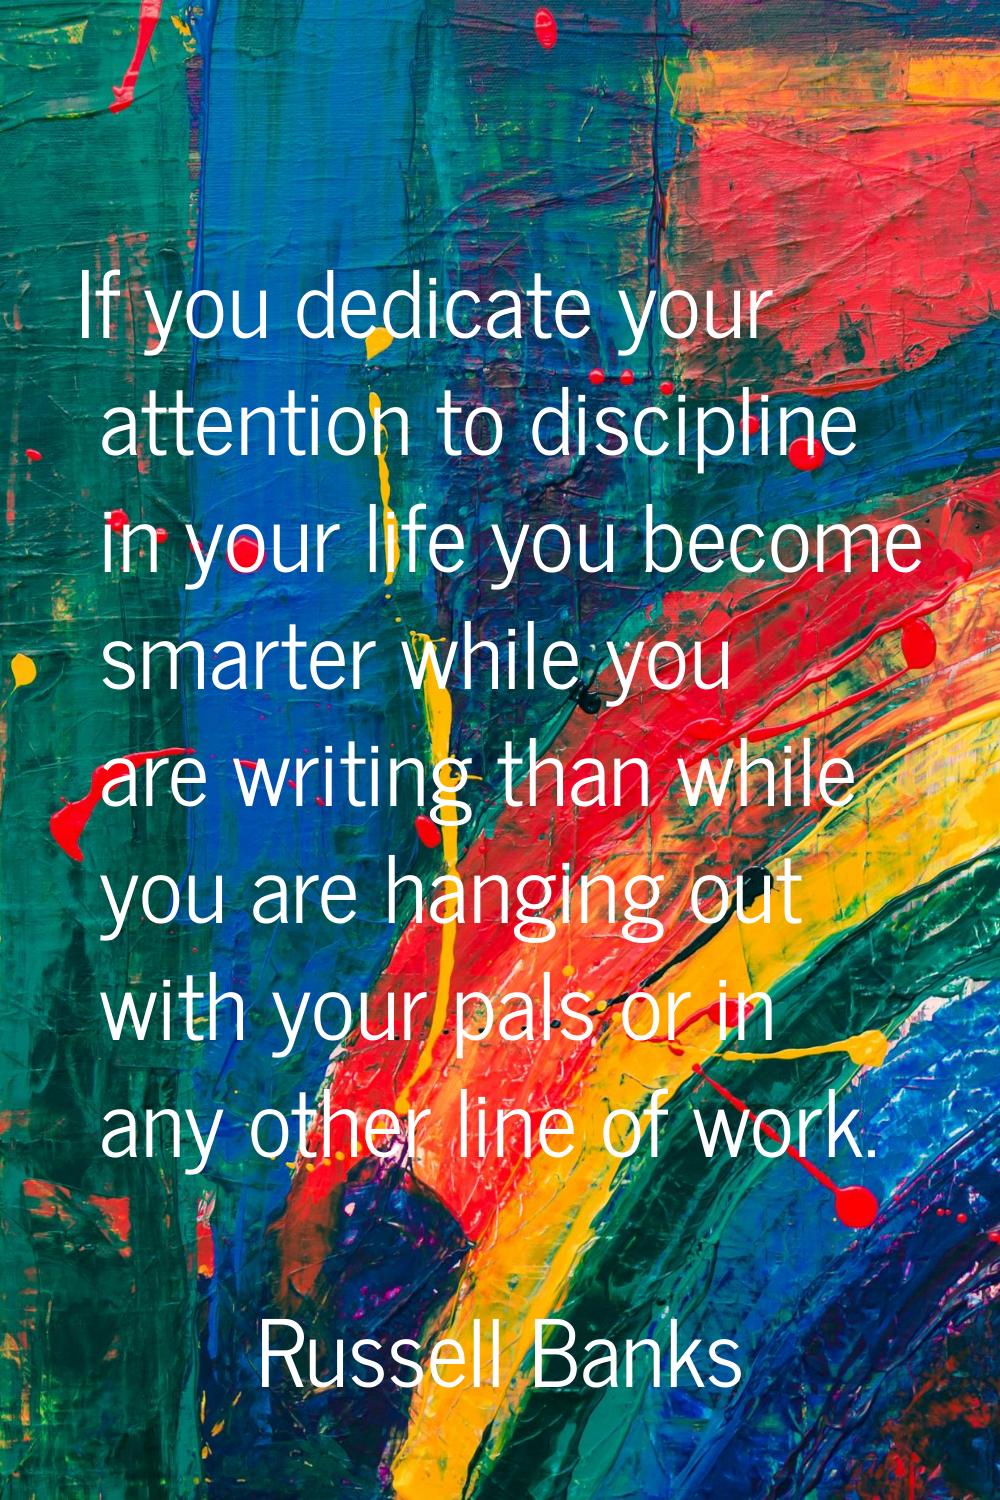 If you dedicate your attention to discipline in your life you become smarter while you are writing 